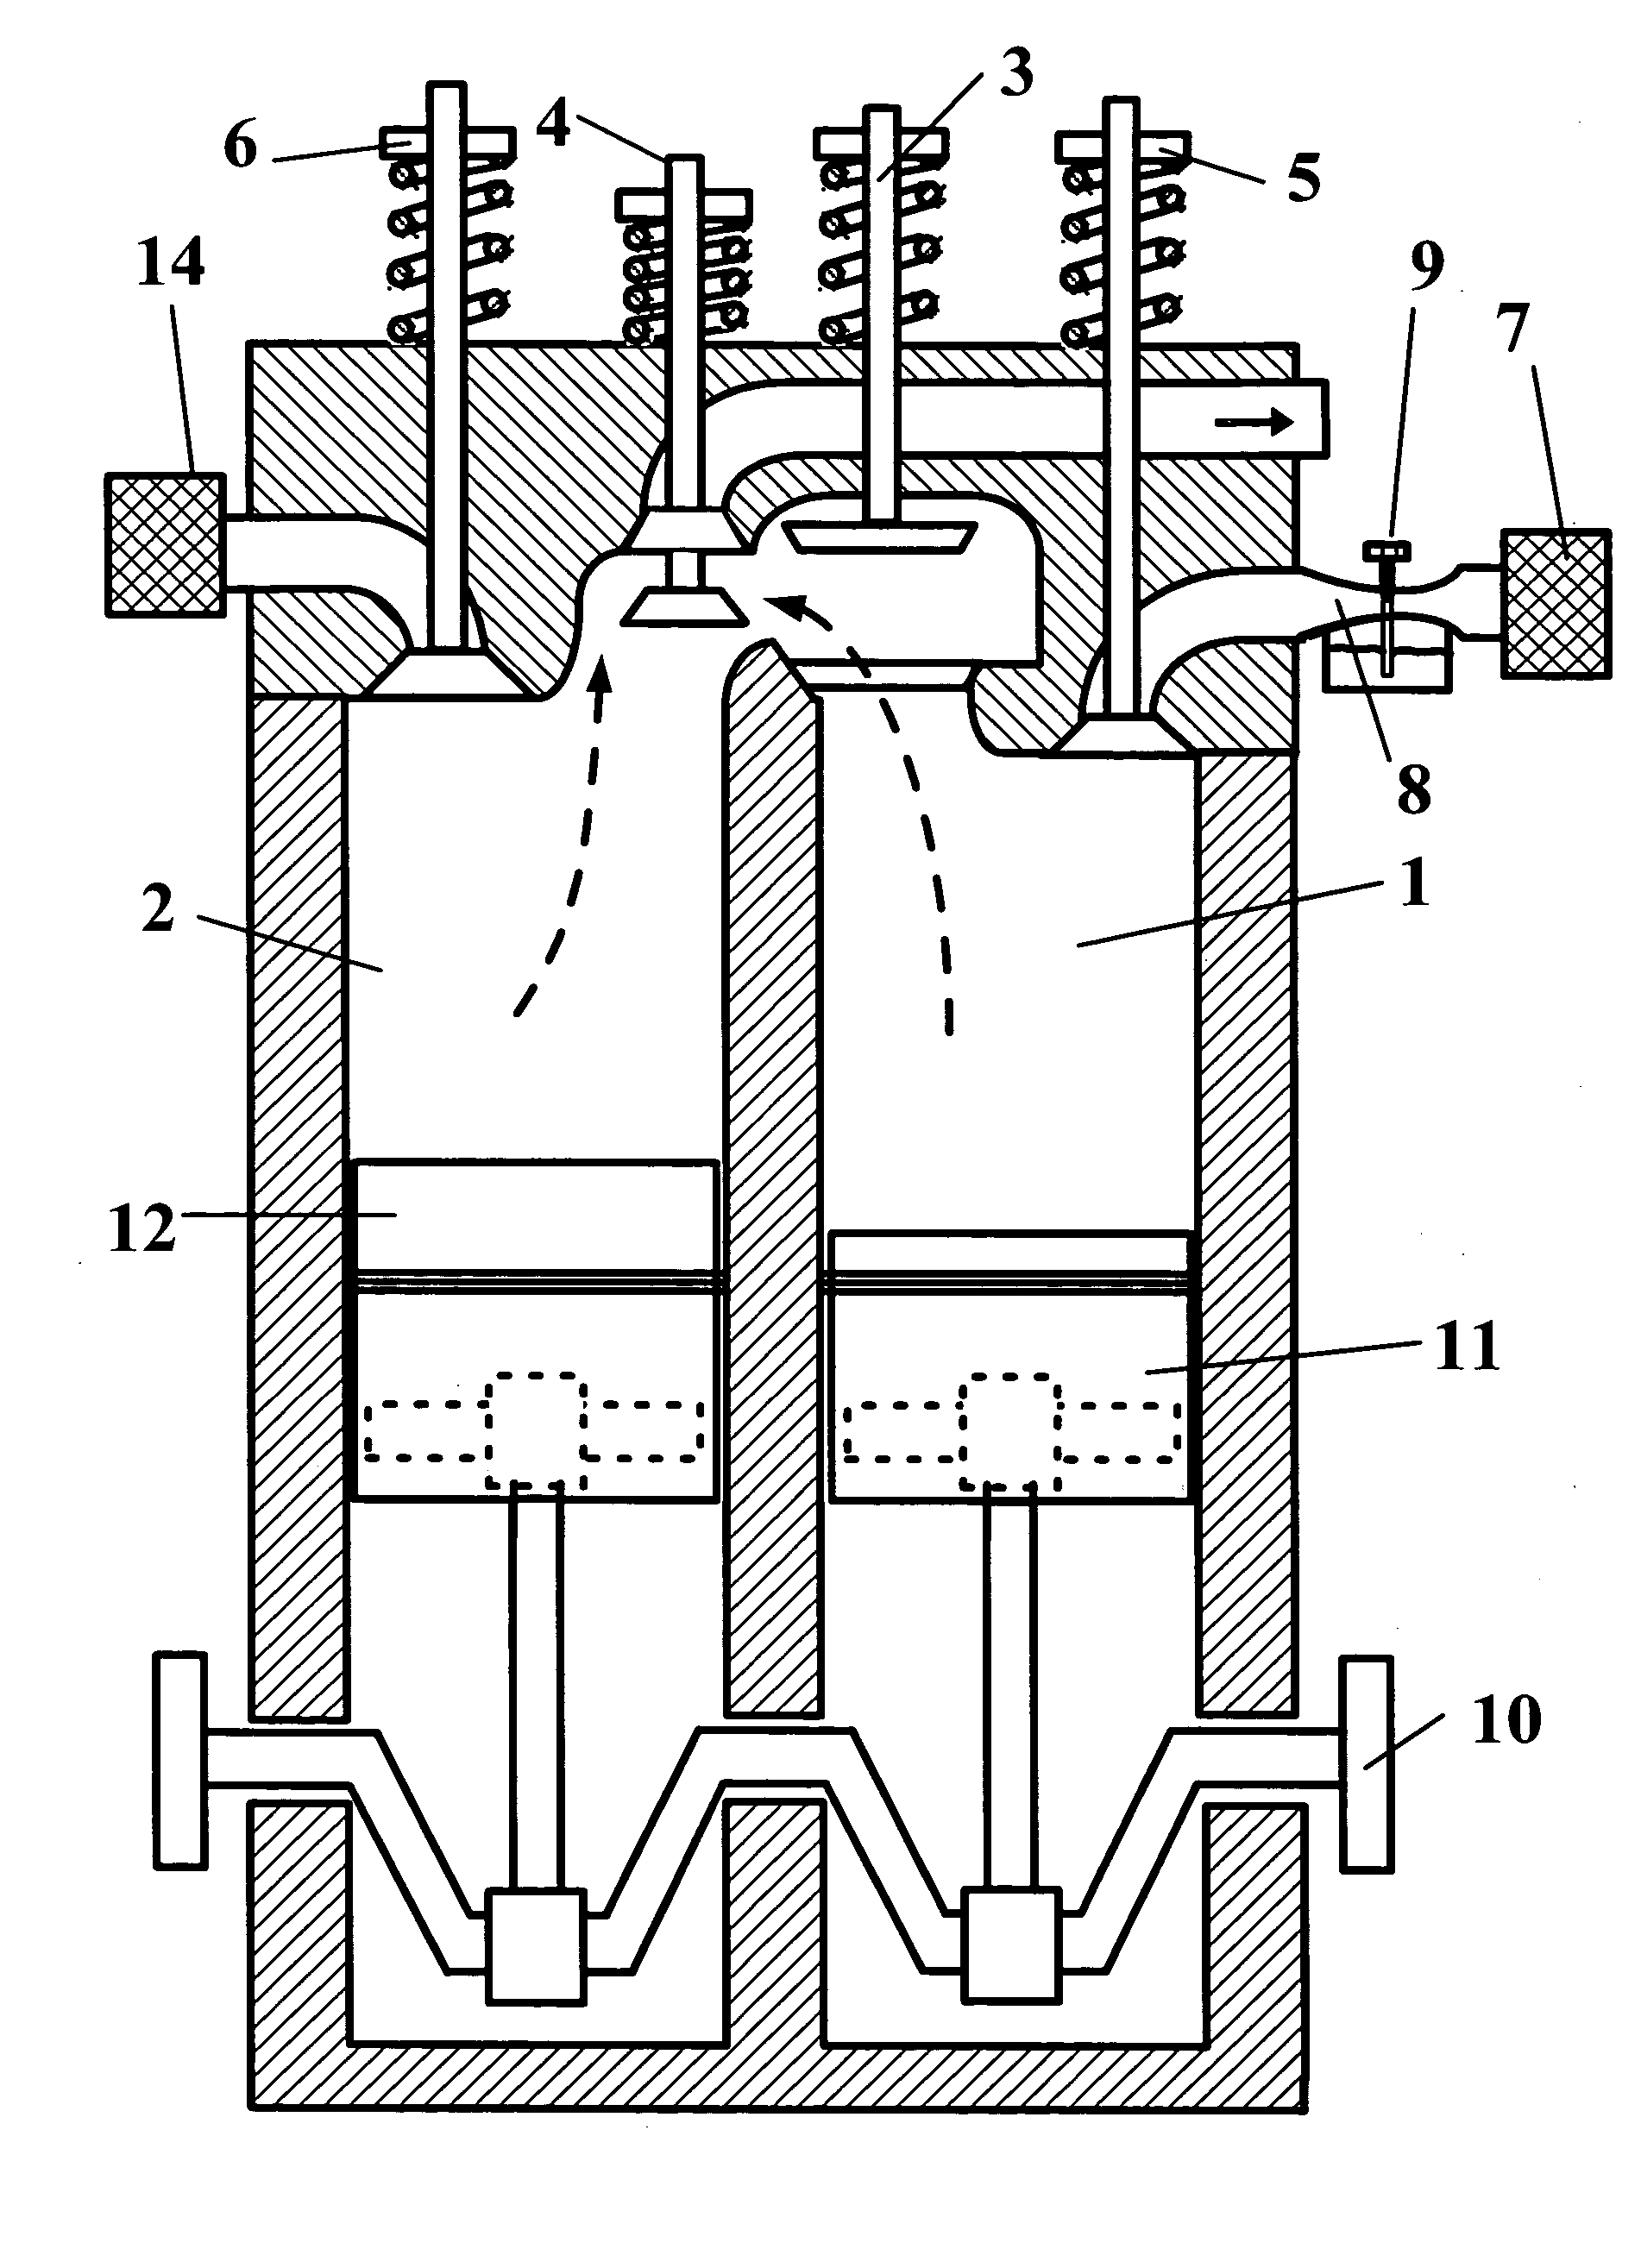 Compression ignition engine by air injection from air-only cylinder to adjacent air-fuel cyliner